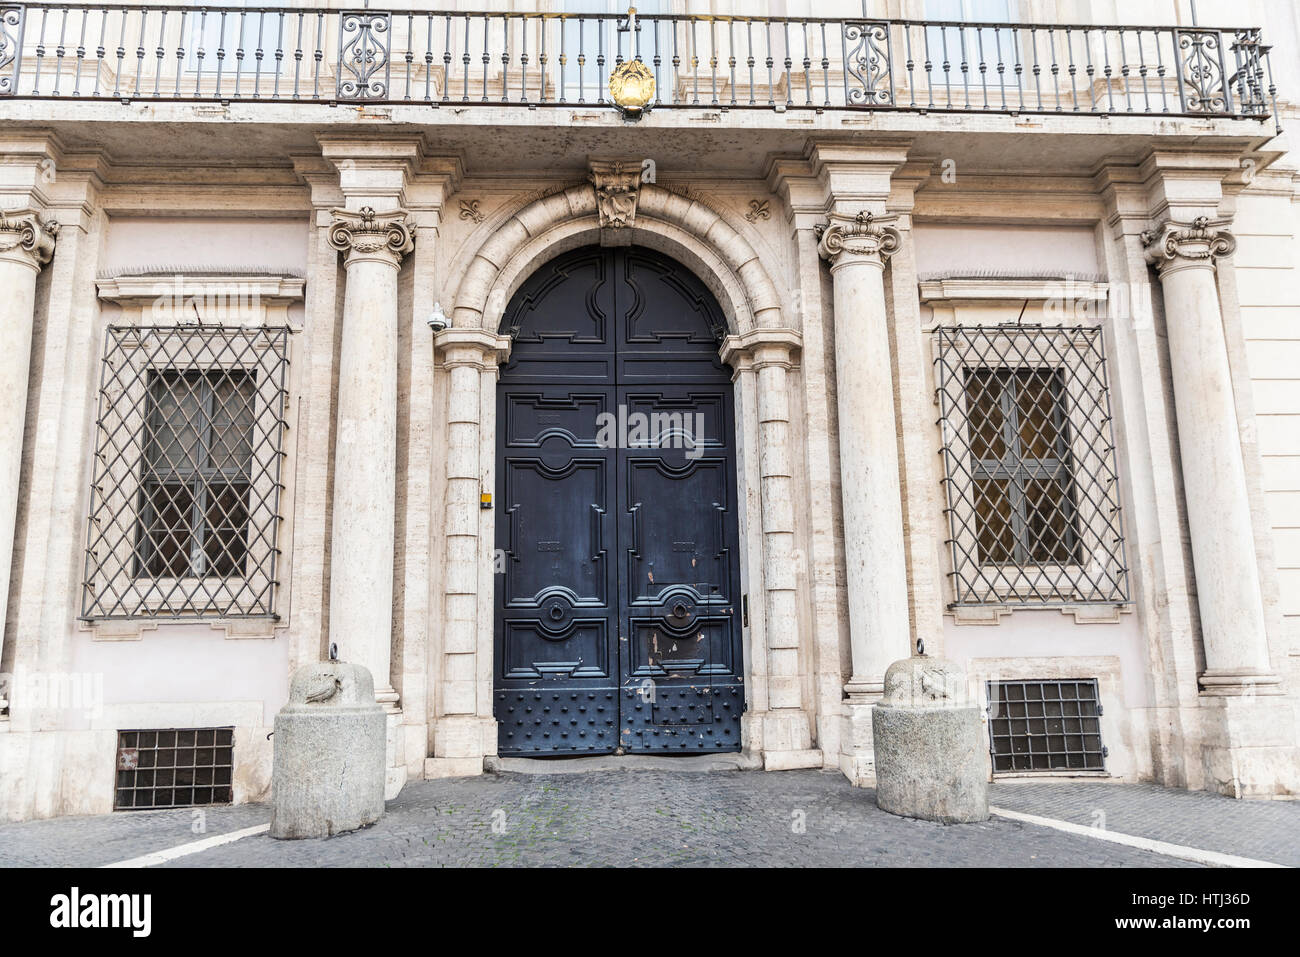 Facade of an old classic building in the historical center of Rome, Italy Stock Photo